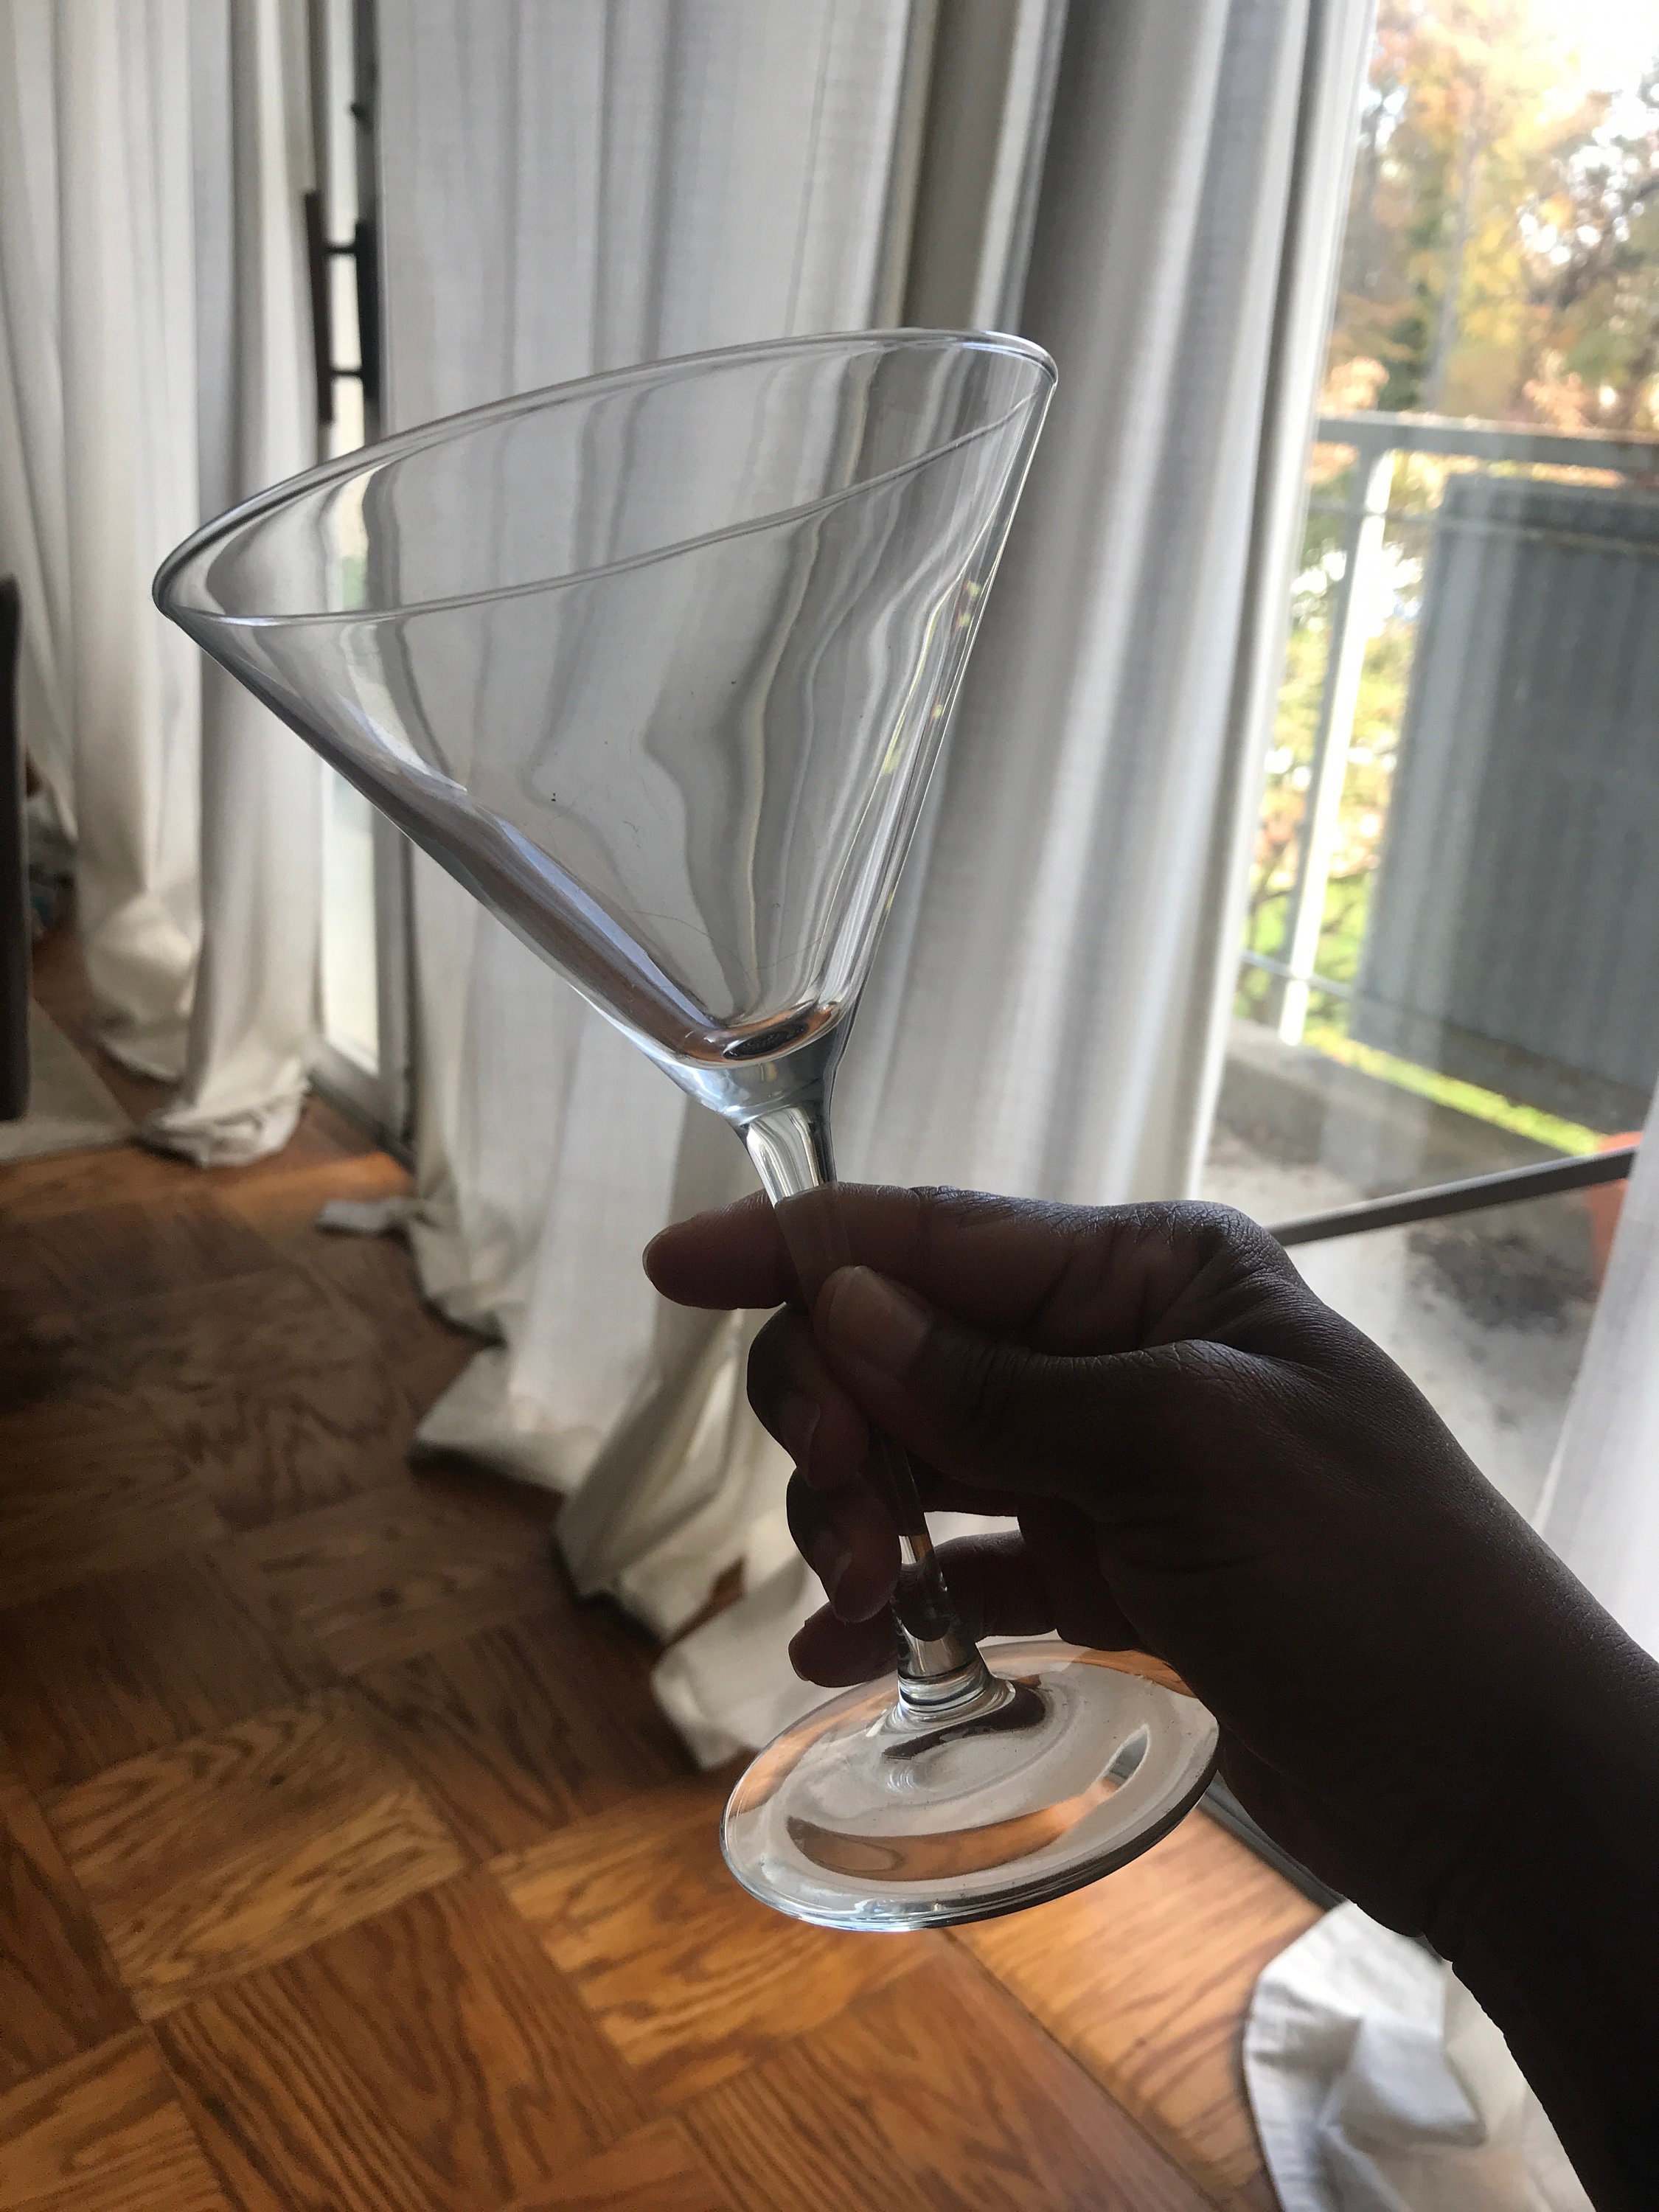 Set of Four Large Martini Cocktail Glass, Glasses For Martini Drinkers,  Large Bar Cart Glasses with Slender Stem, Gift For Groomsman